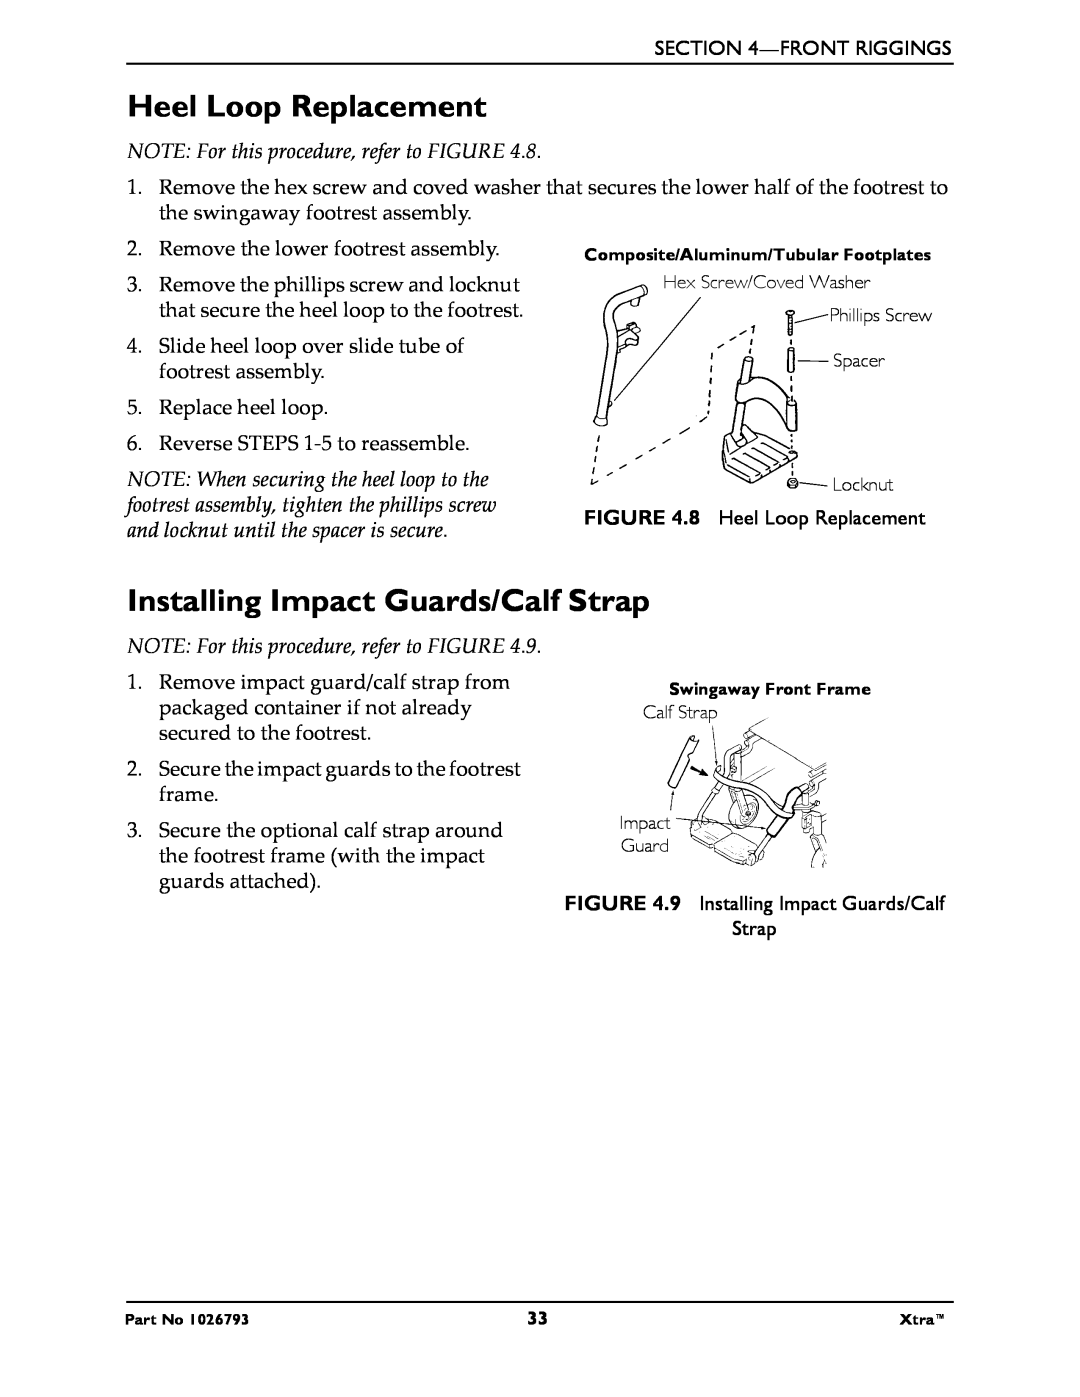 Invacare 1026793 Heel Loop Replacement, Installing Impact Guards/Calf Strap, NOTE For this procedure, refer to FIGURE 